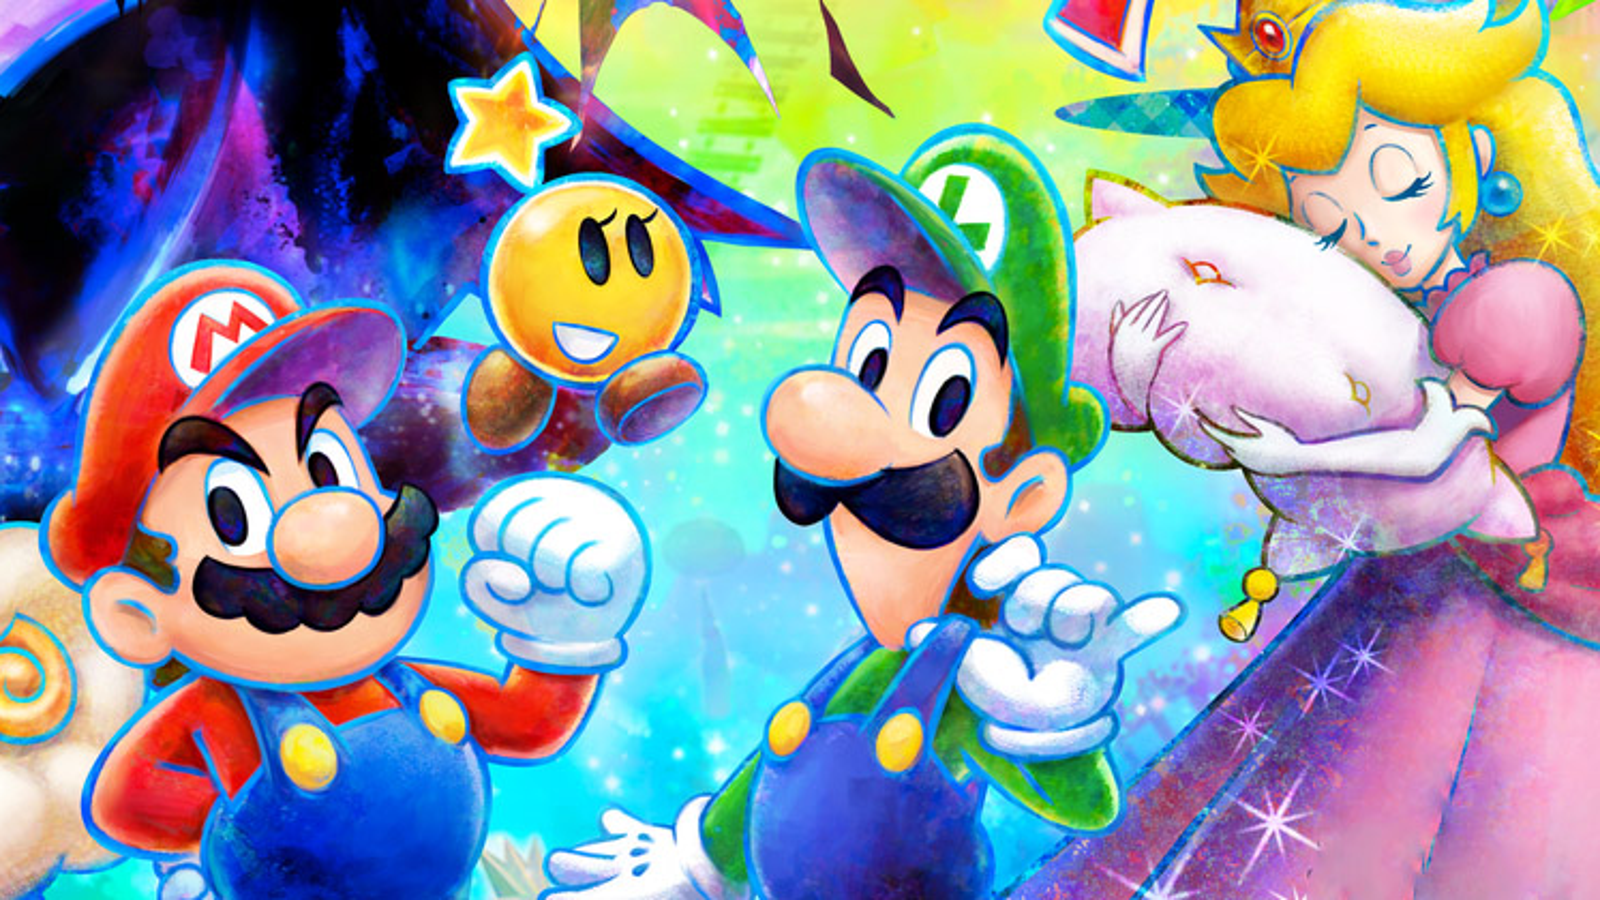 Mario & Luigi: Dream Team Review: The best and dreamiest of the series